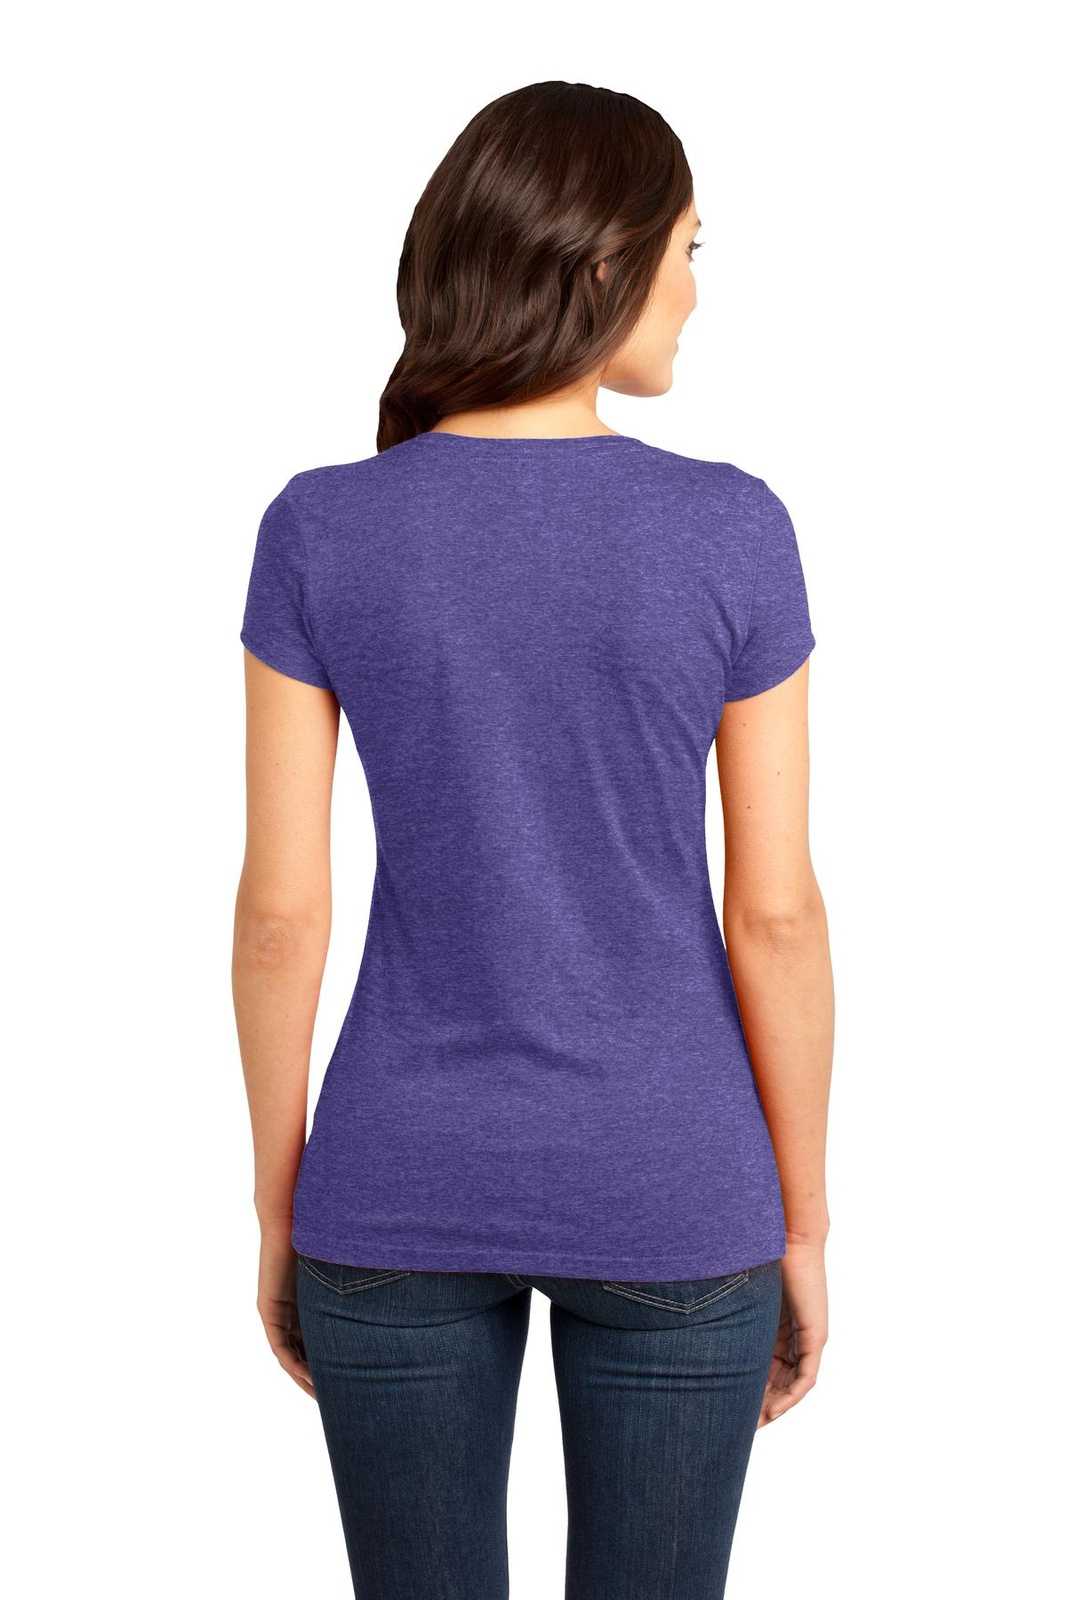 District DT6001 Women's Fitted Very Important Tee - Heathered Purple - HIT a Double - 1